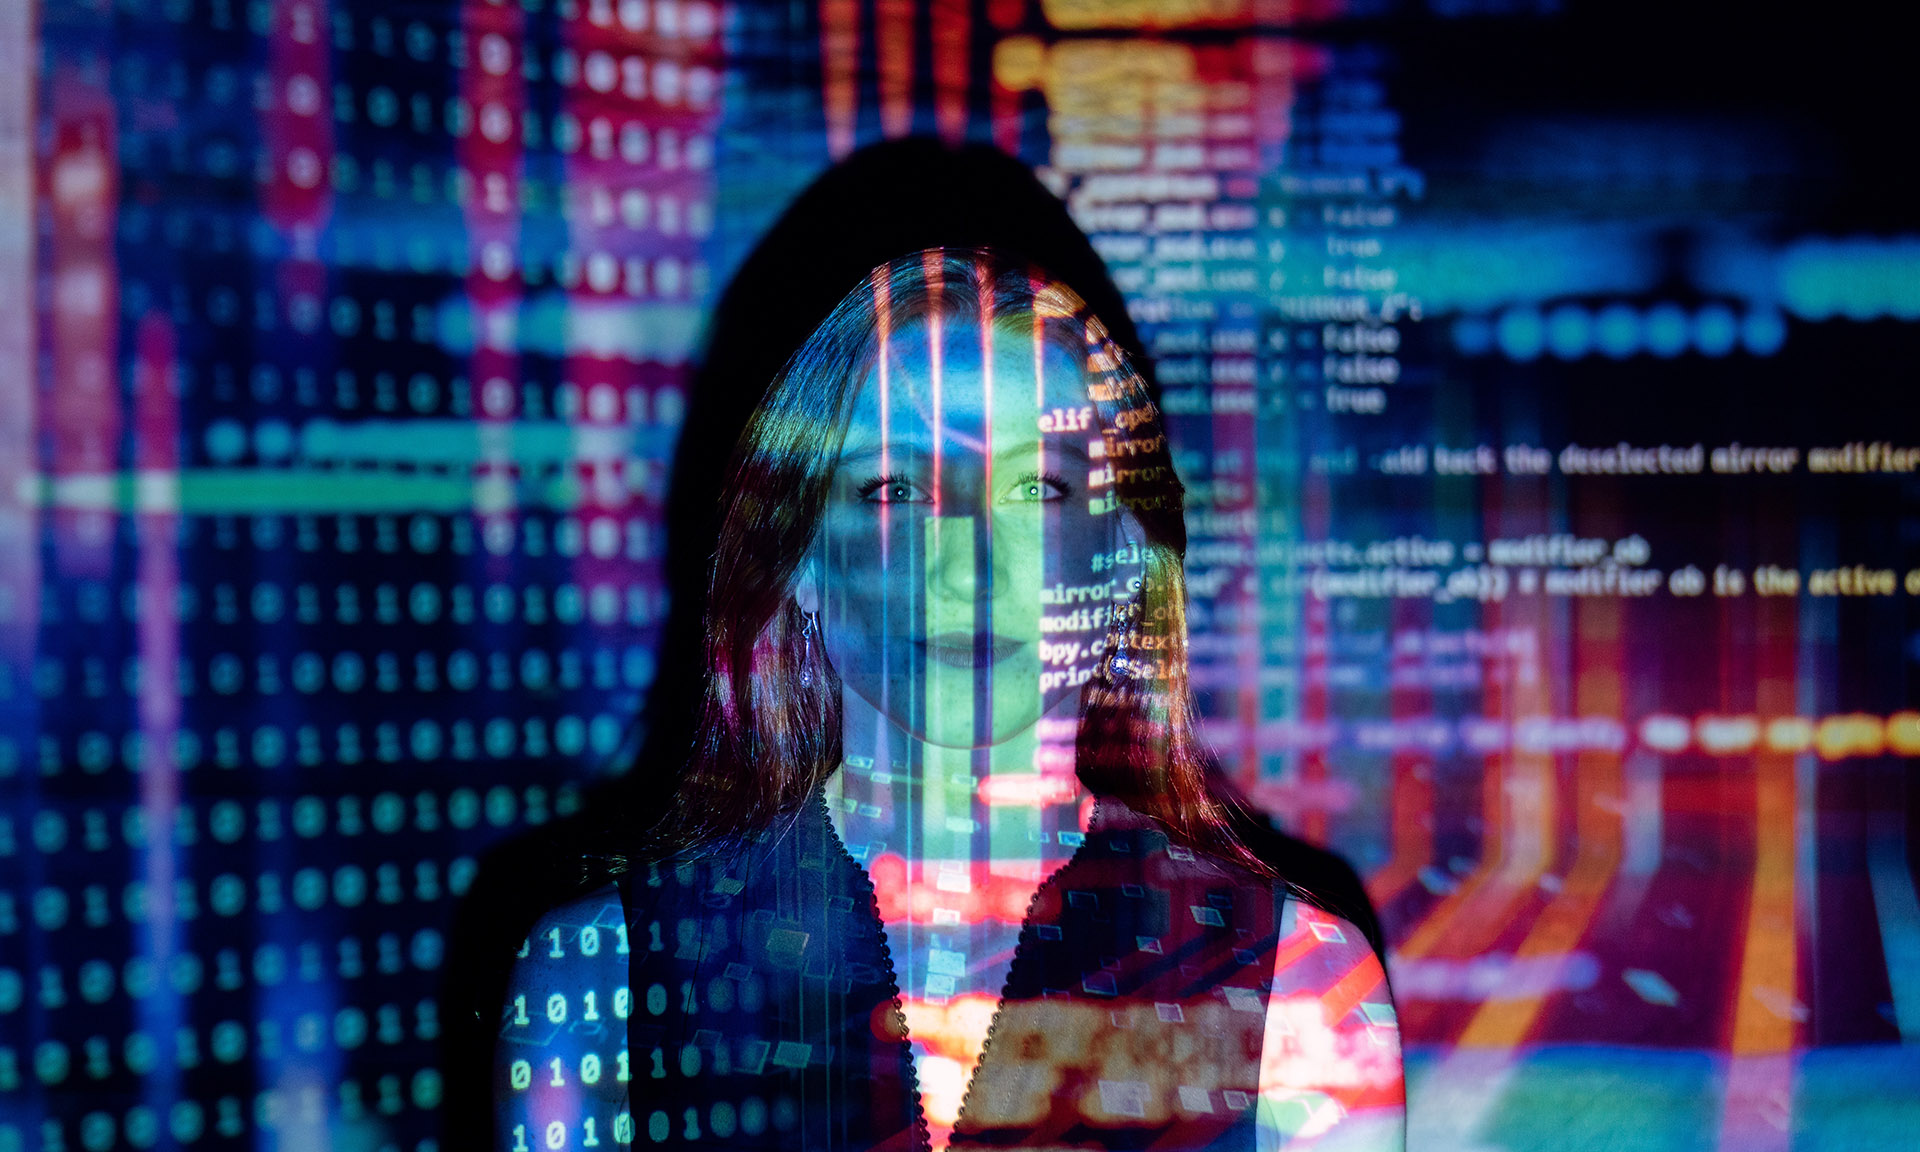 Young professional woman with computer code projected over her face and torso.